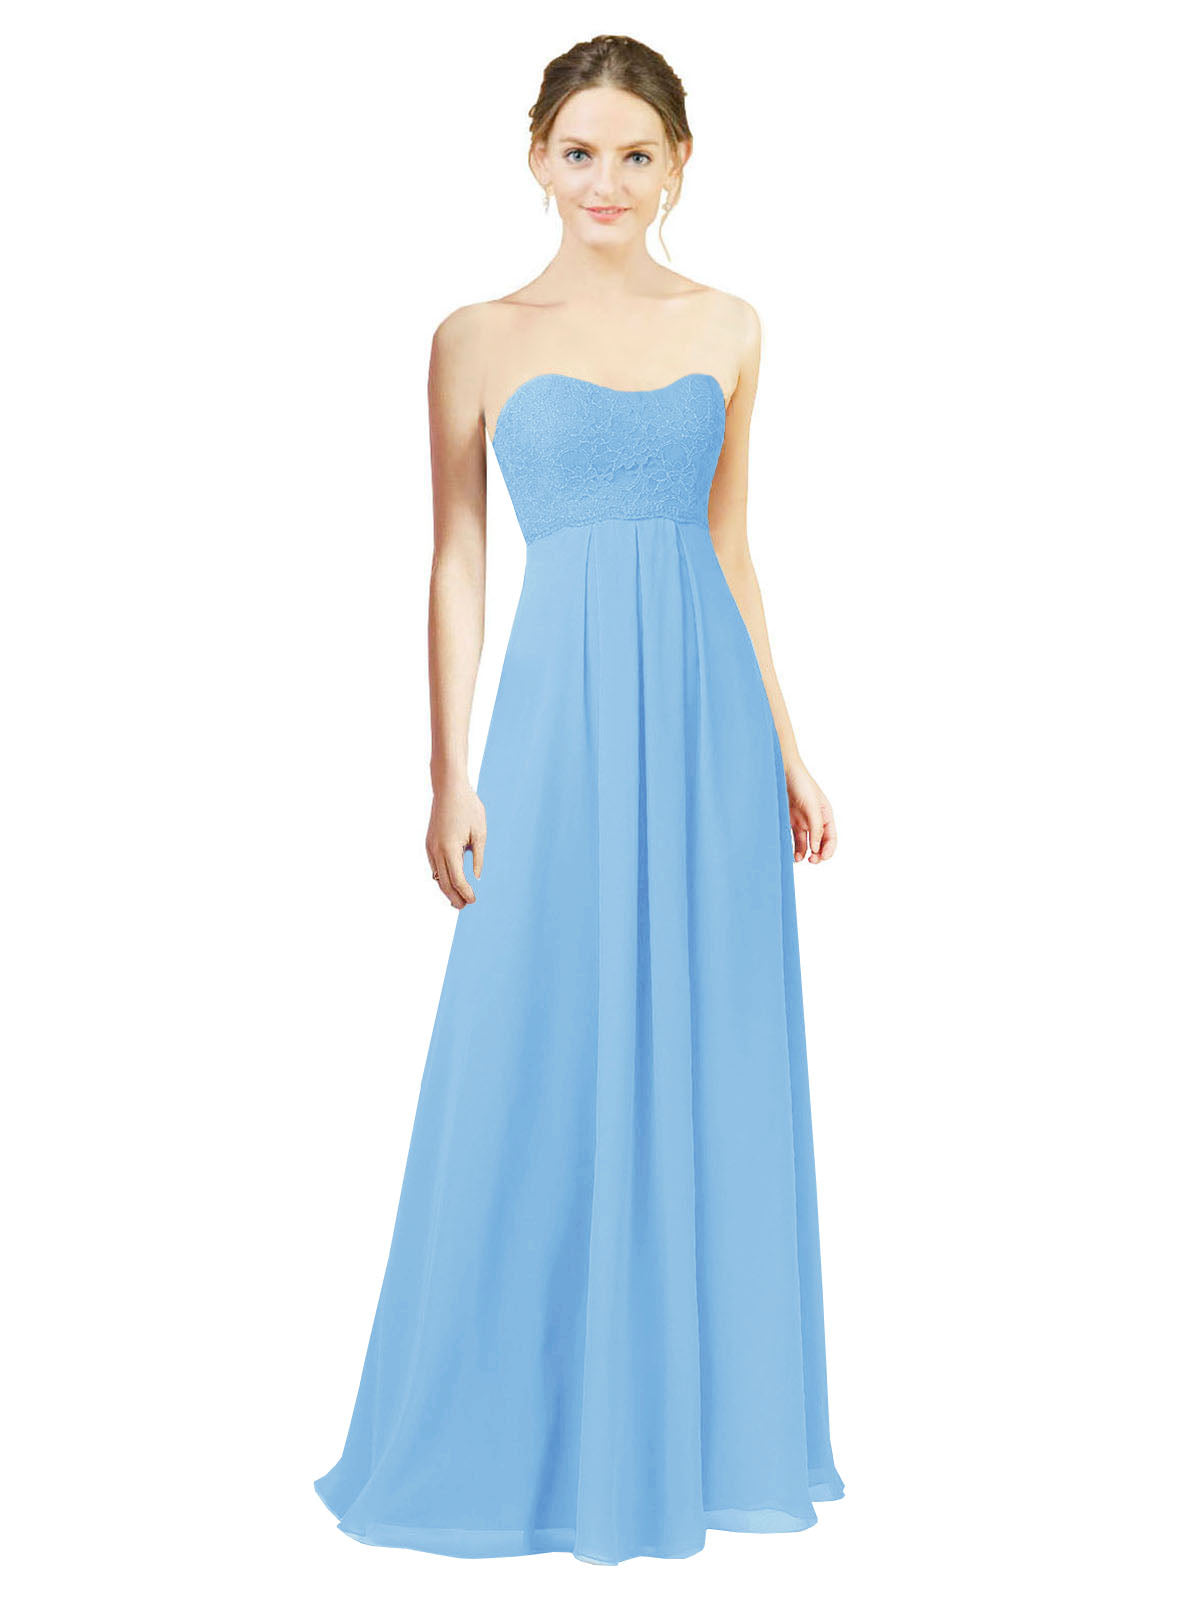 Periwinkle A-Line Sweetheart Strapless Long Bridesmaid Dress Melany